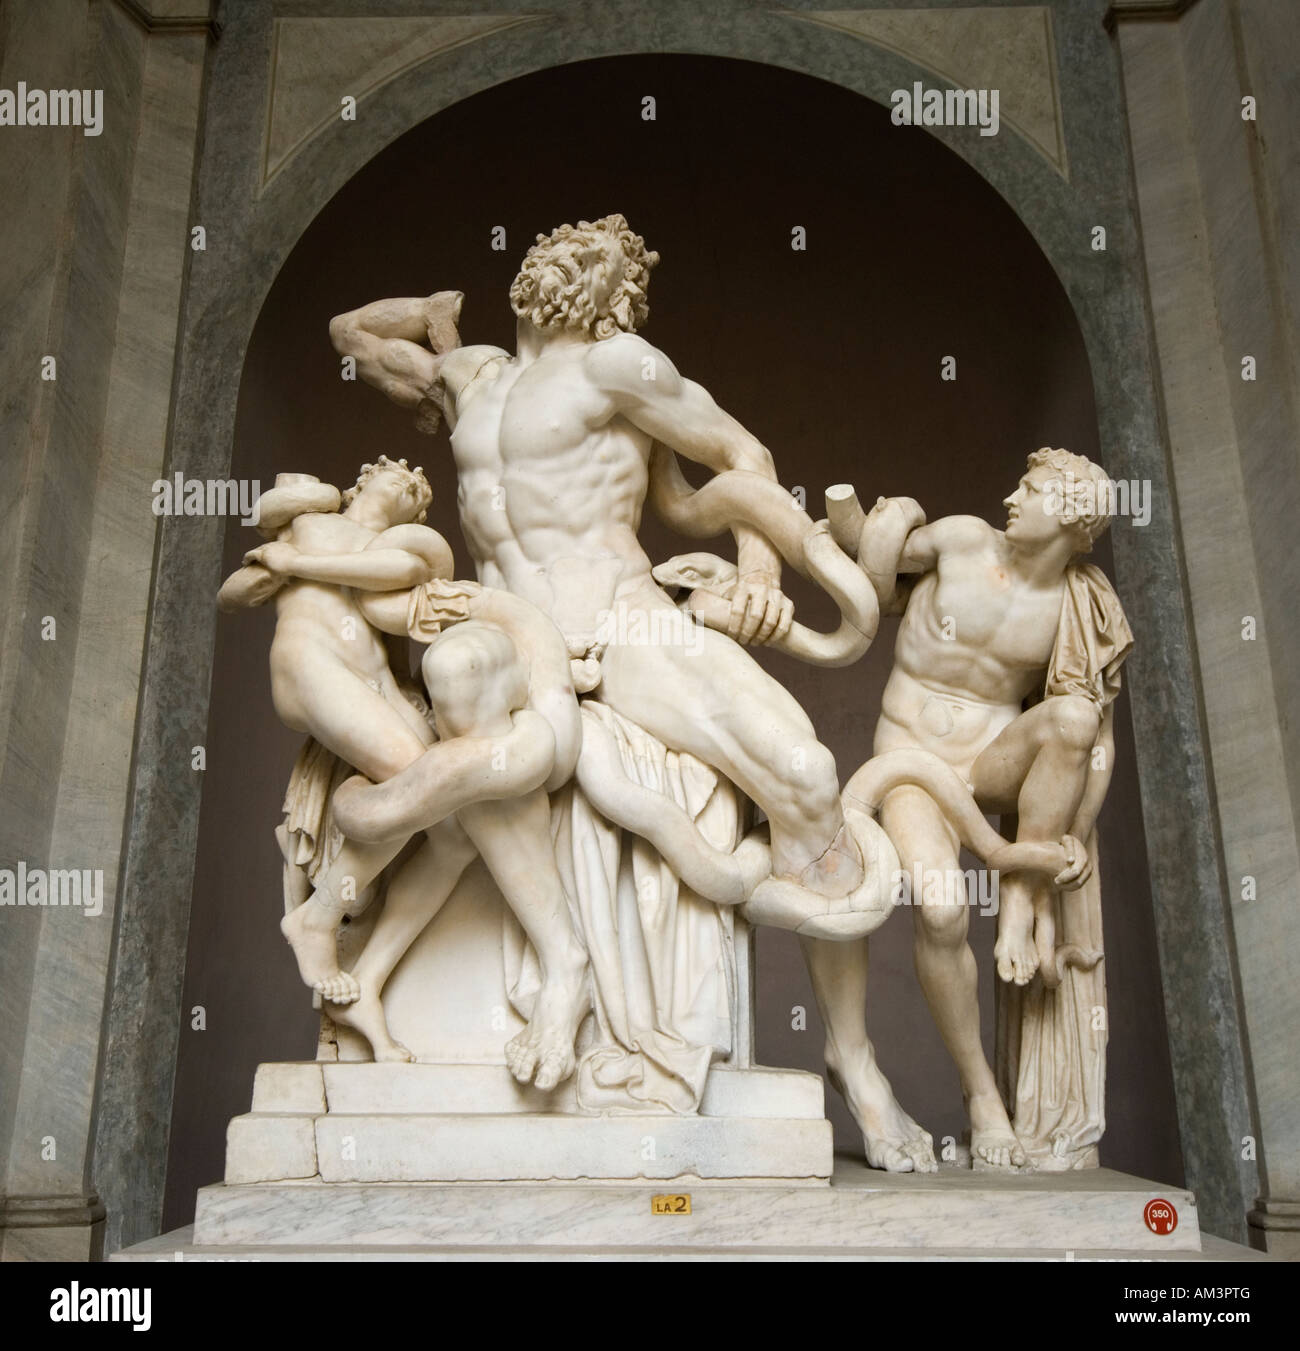 The Laocoon group by 1st century Rhodes sculptors is among the most notable sculptures in the Vatican Museum Stock Photo